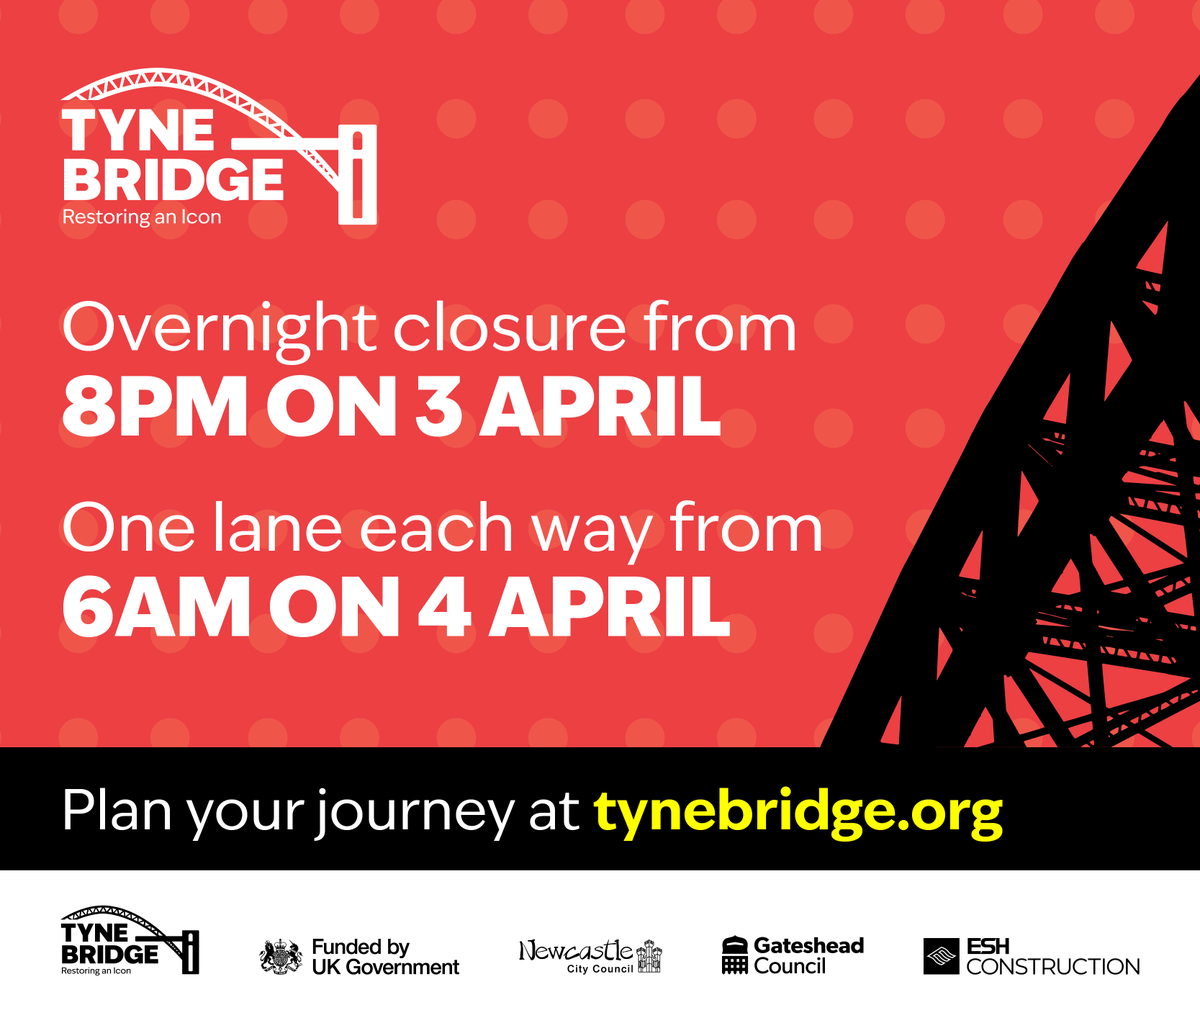 🚧 Tyne Bridge restoration underway - there will be a full overnight closure tonight and the Tyne Bridge will be reduced to two lanes from 6am tomorrow. 🚌 Please plan ahead, follow the travel advice and make the switch to public transport as we restore this icon.